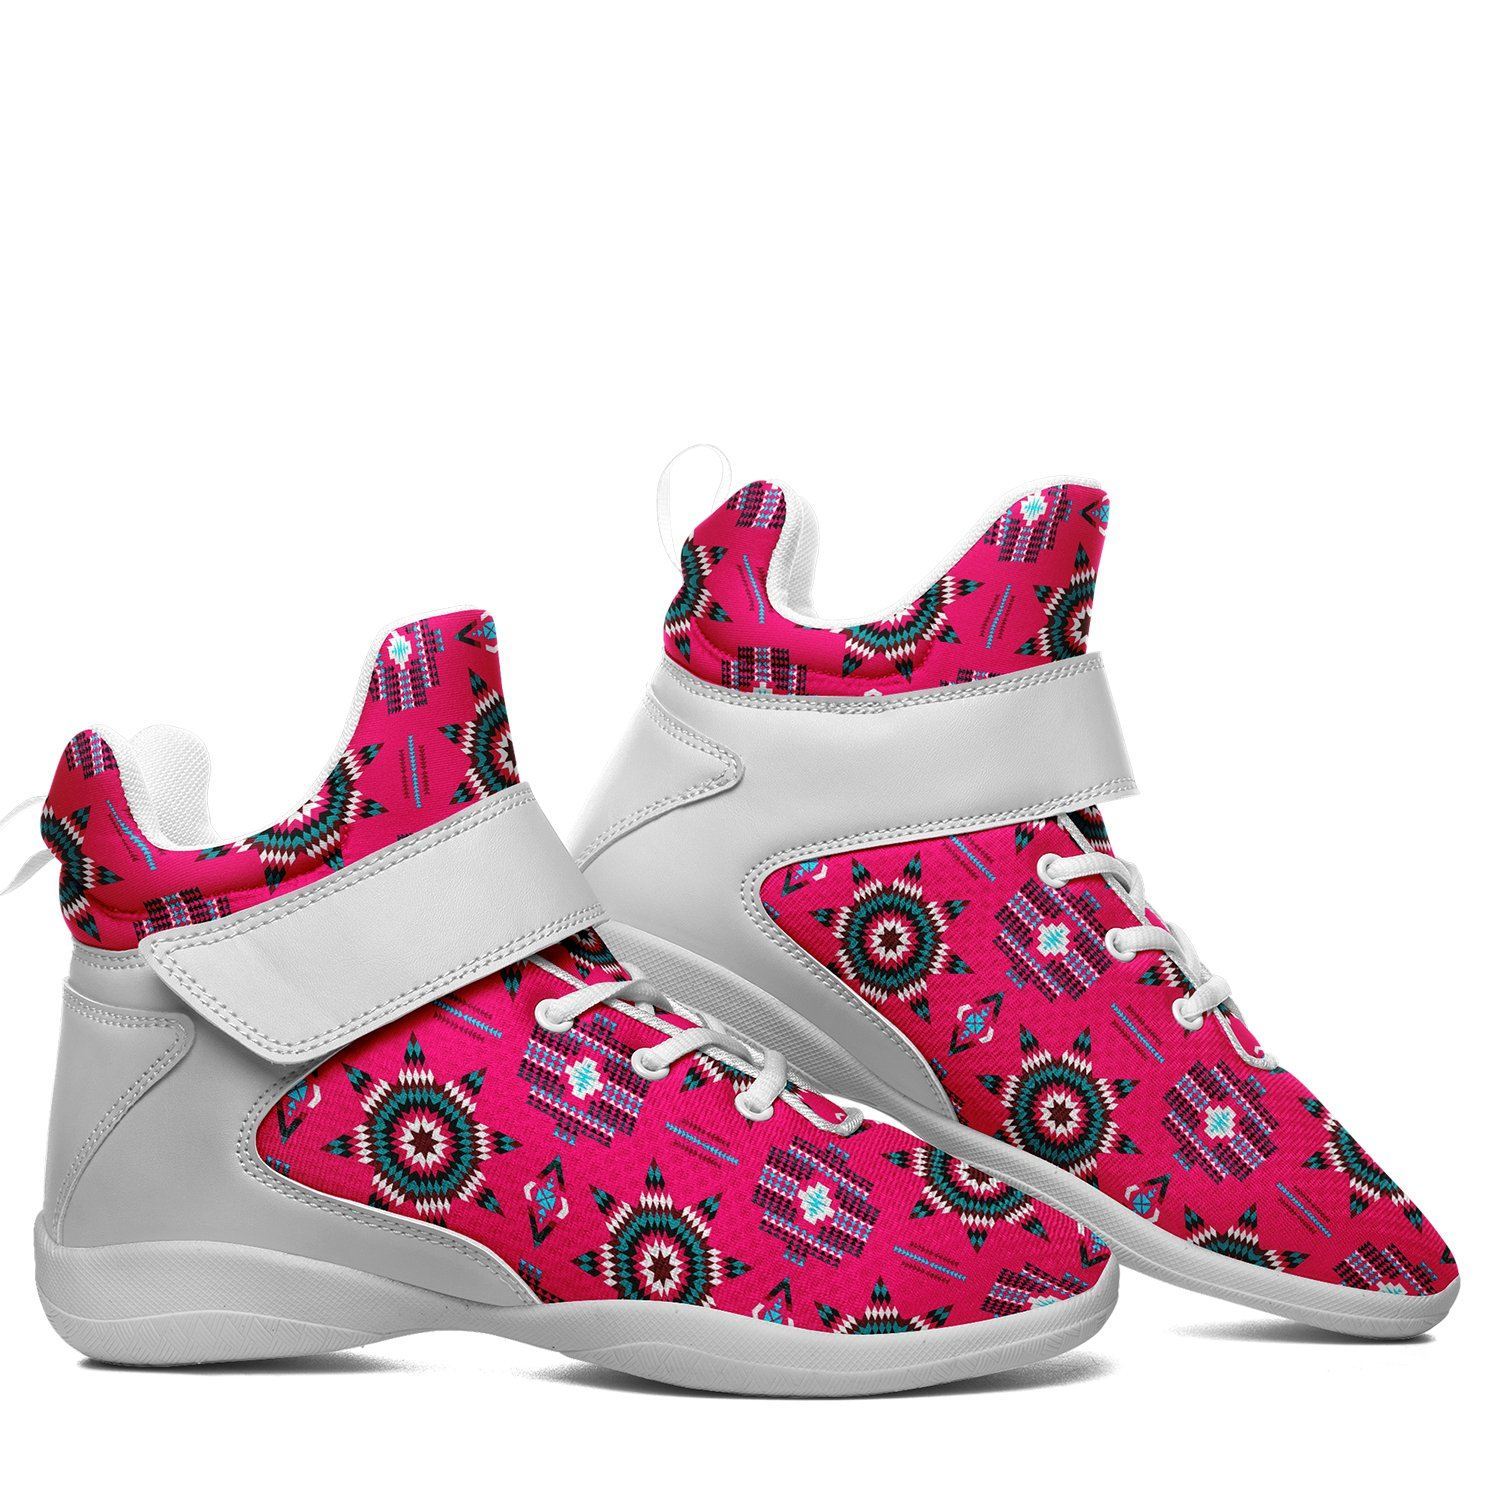 Rising Star Strawberry Moon Ipottaa Basketball / Sport High Top Shoes - White Sole 49 Dzine 